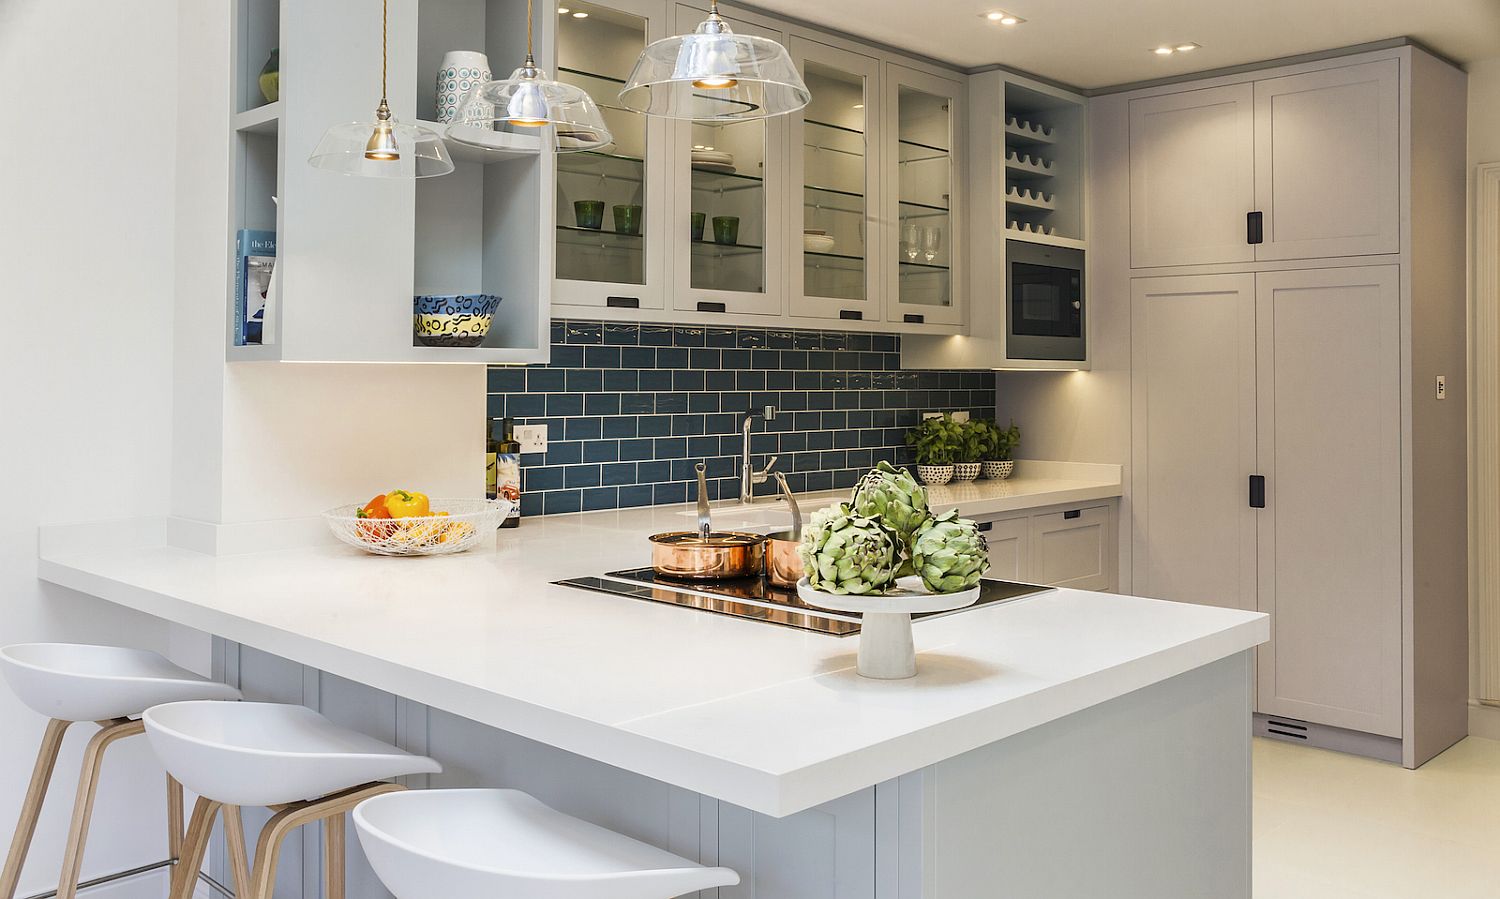 Subway Tile Backsplash adds color to the kitchen in white